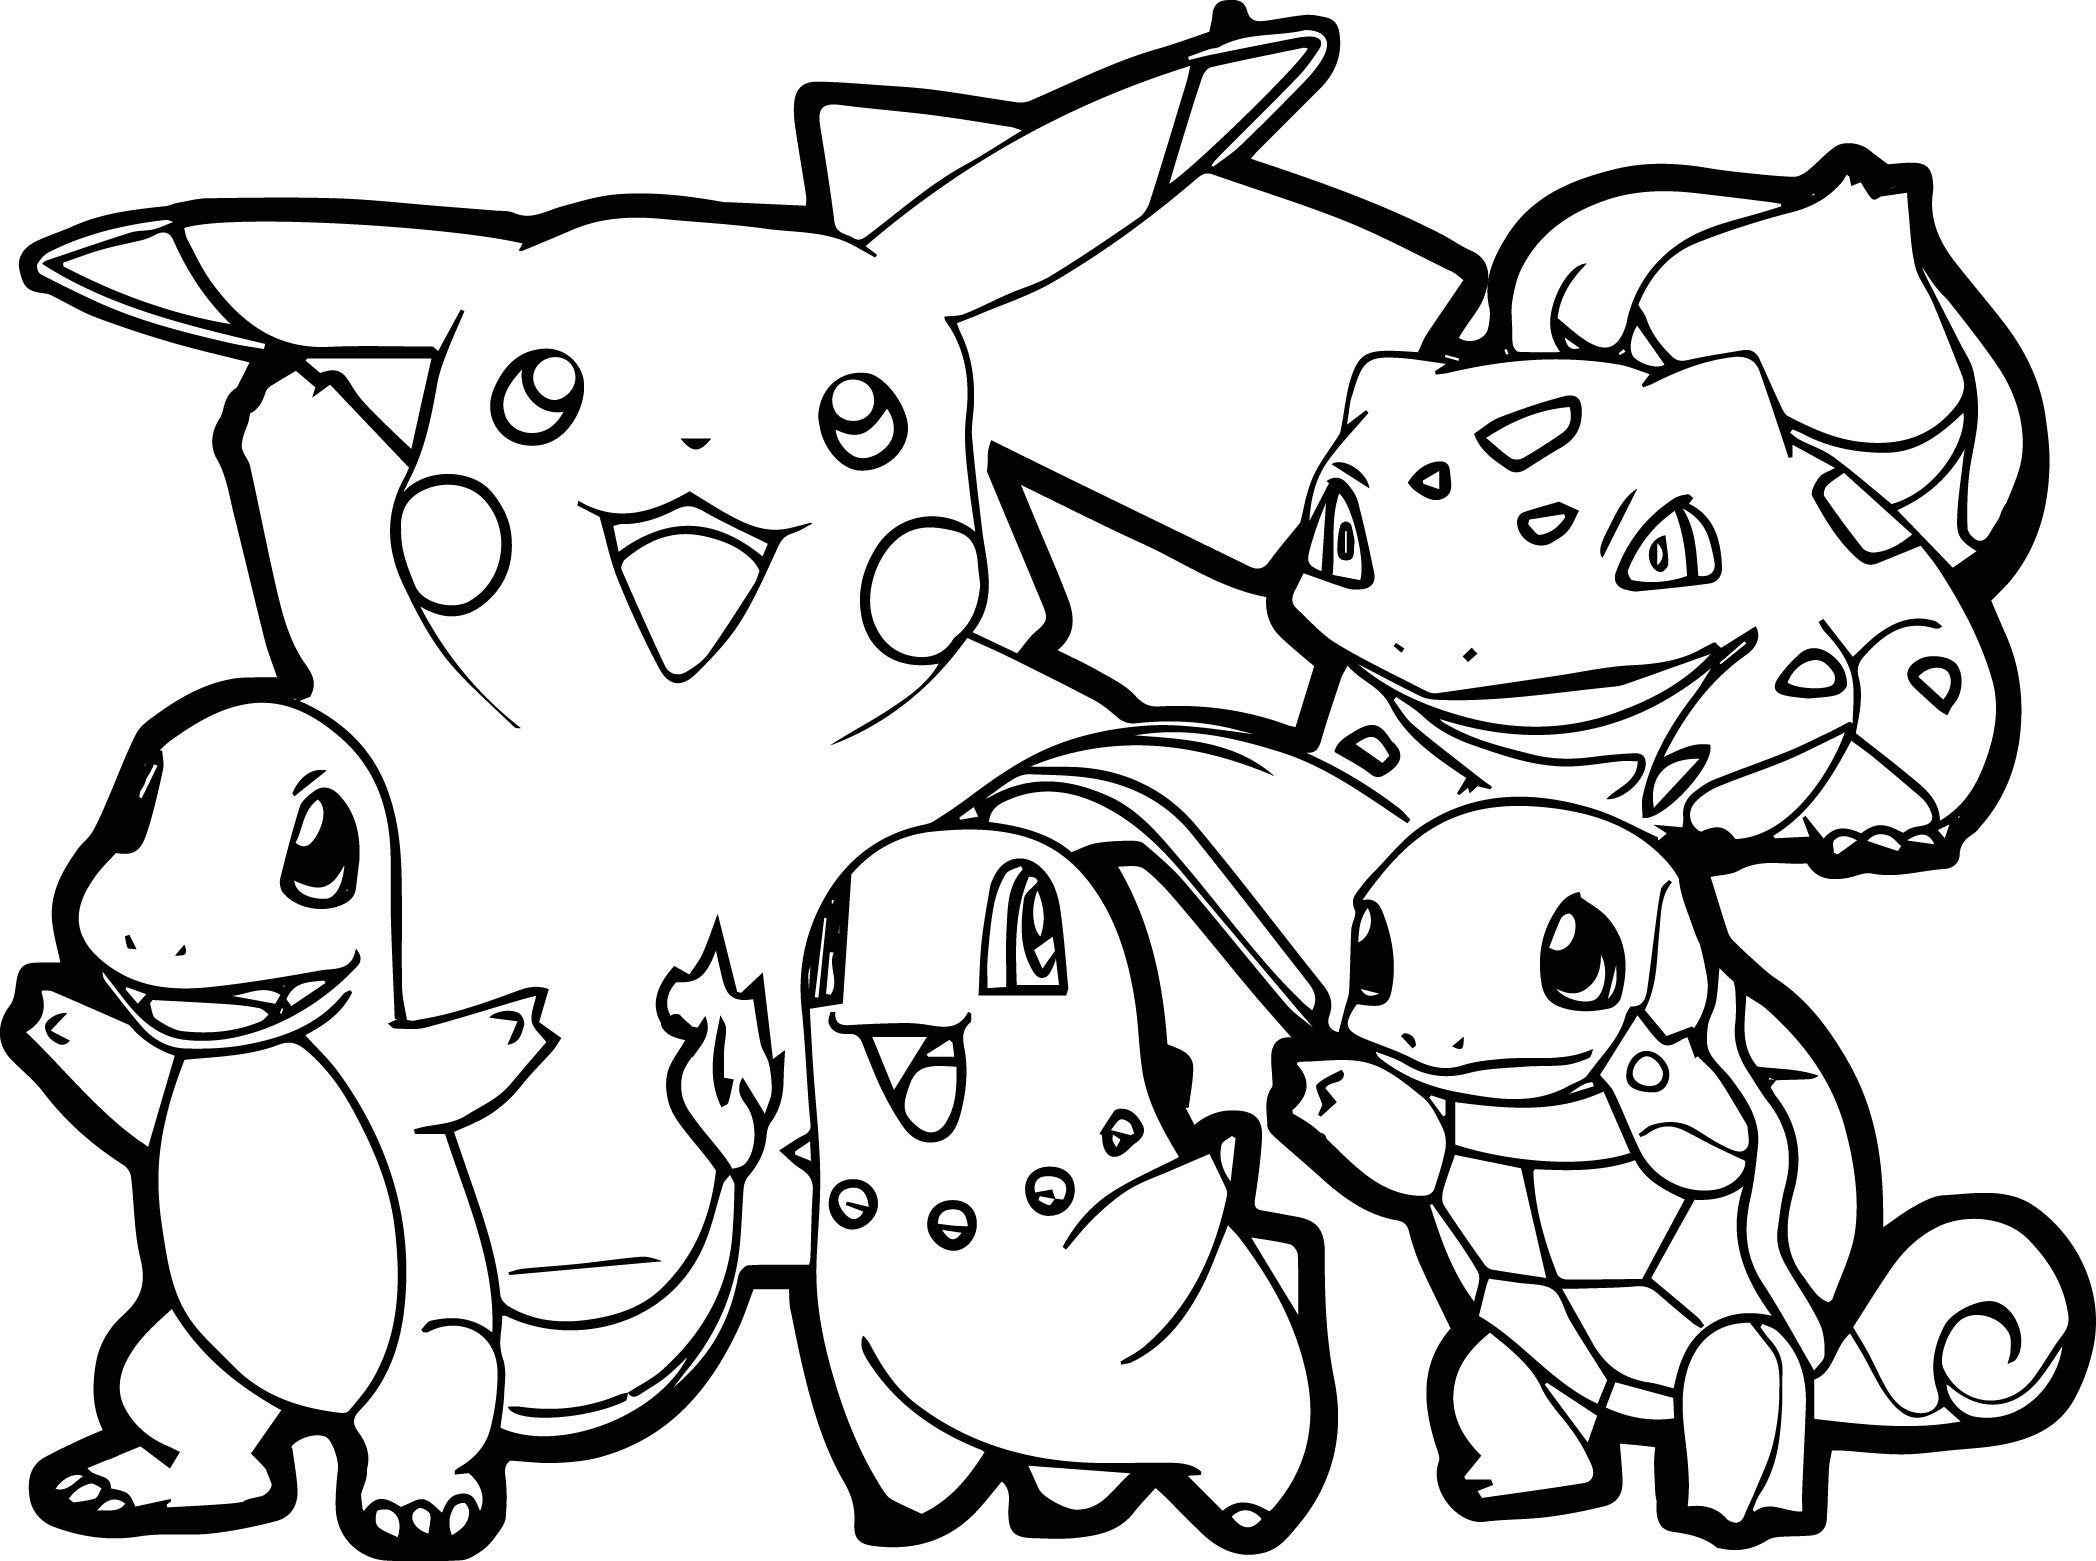 Pokemon For Children - All Pokemon Coloring Pages Kids Coloring Pages - Free Printable Pokemon Coloring Pages